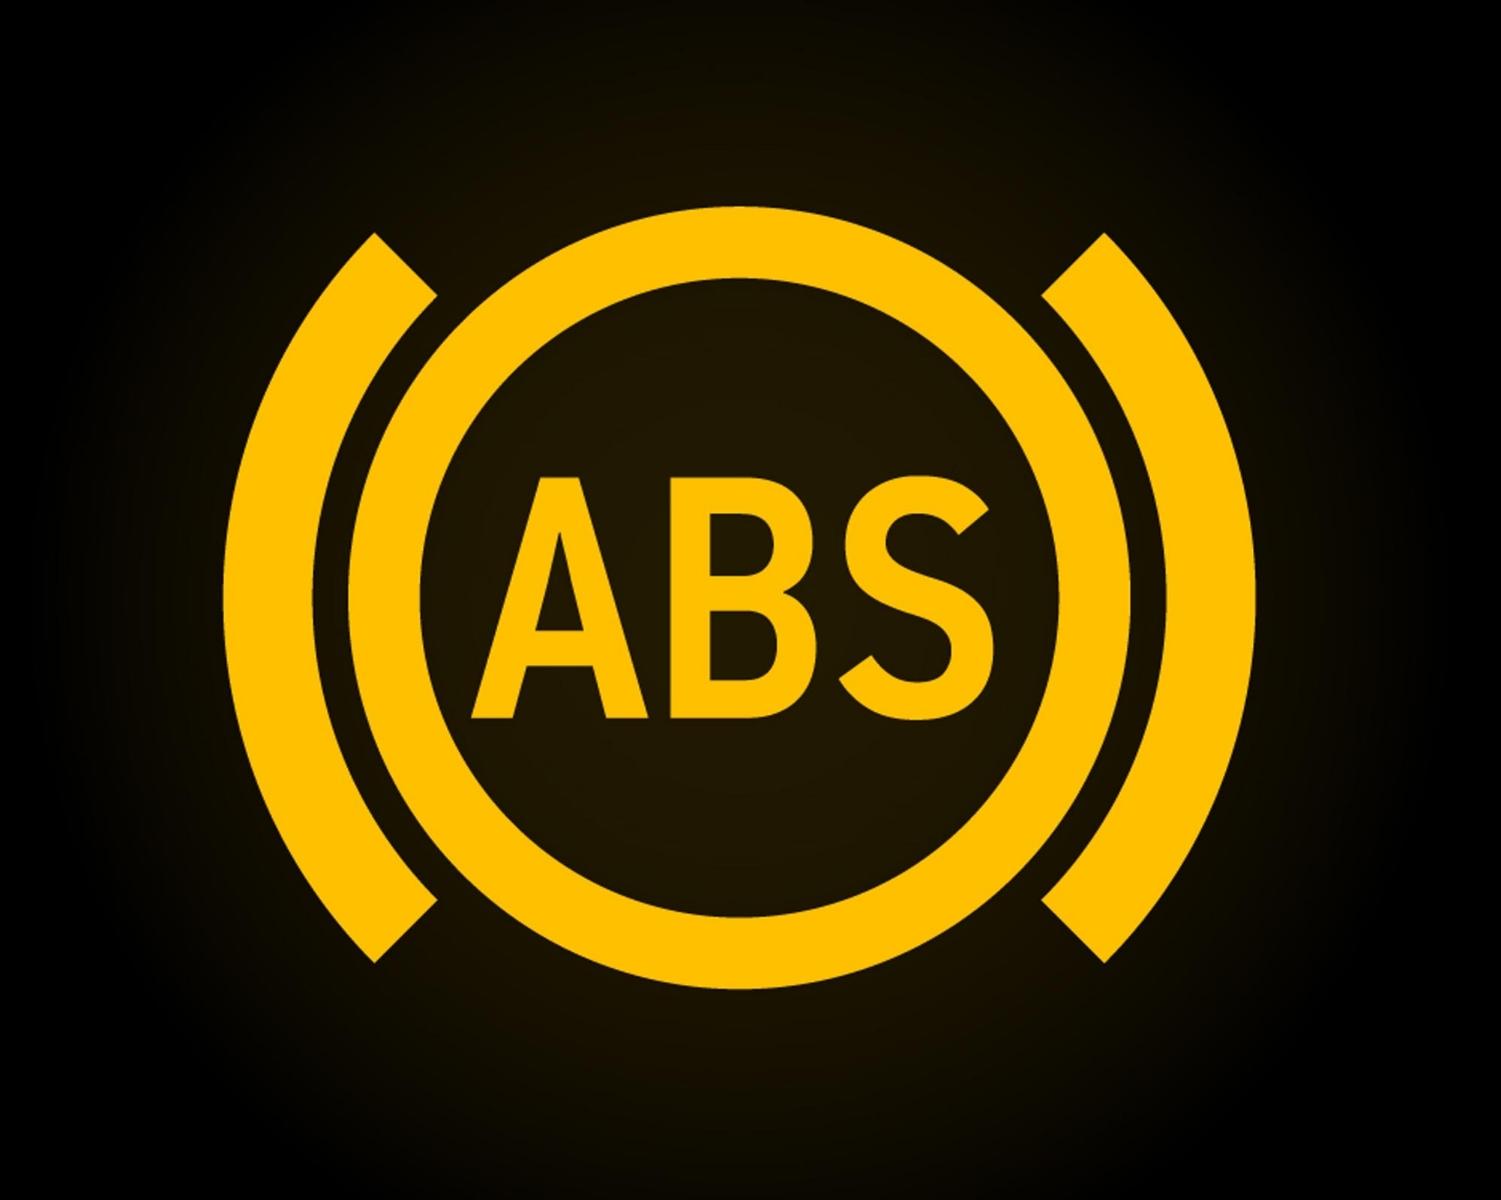 1971 – ABS technology